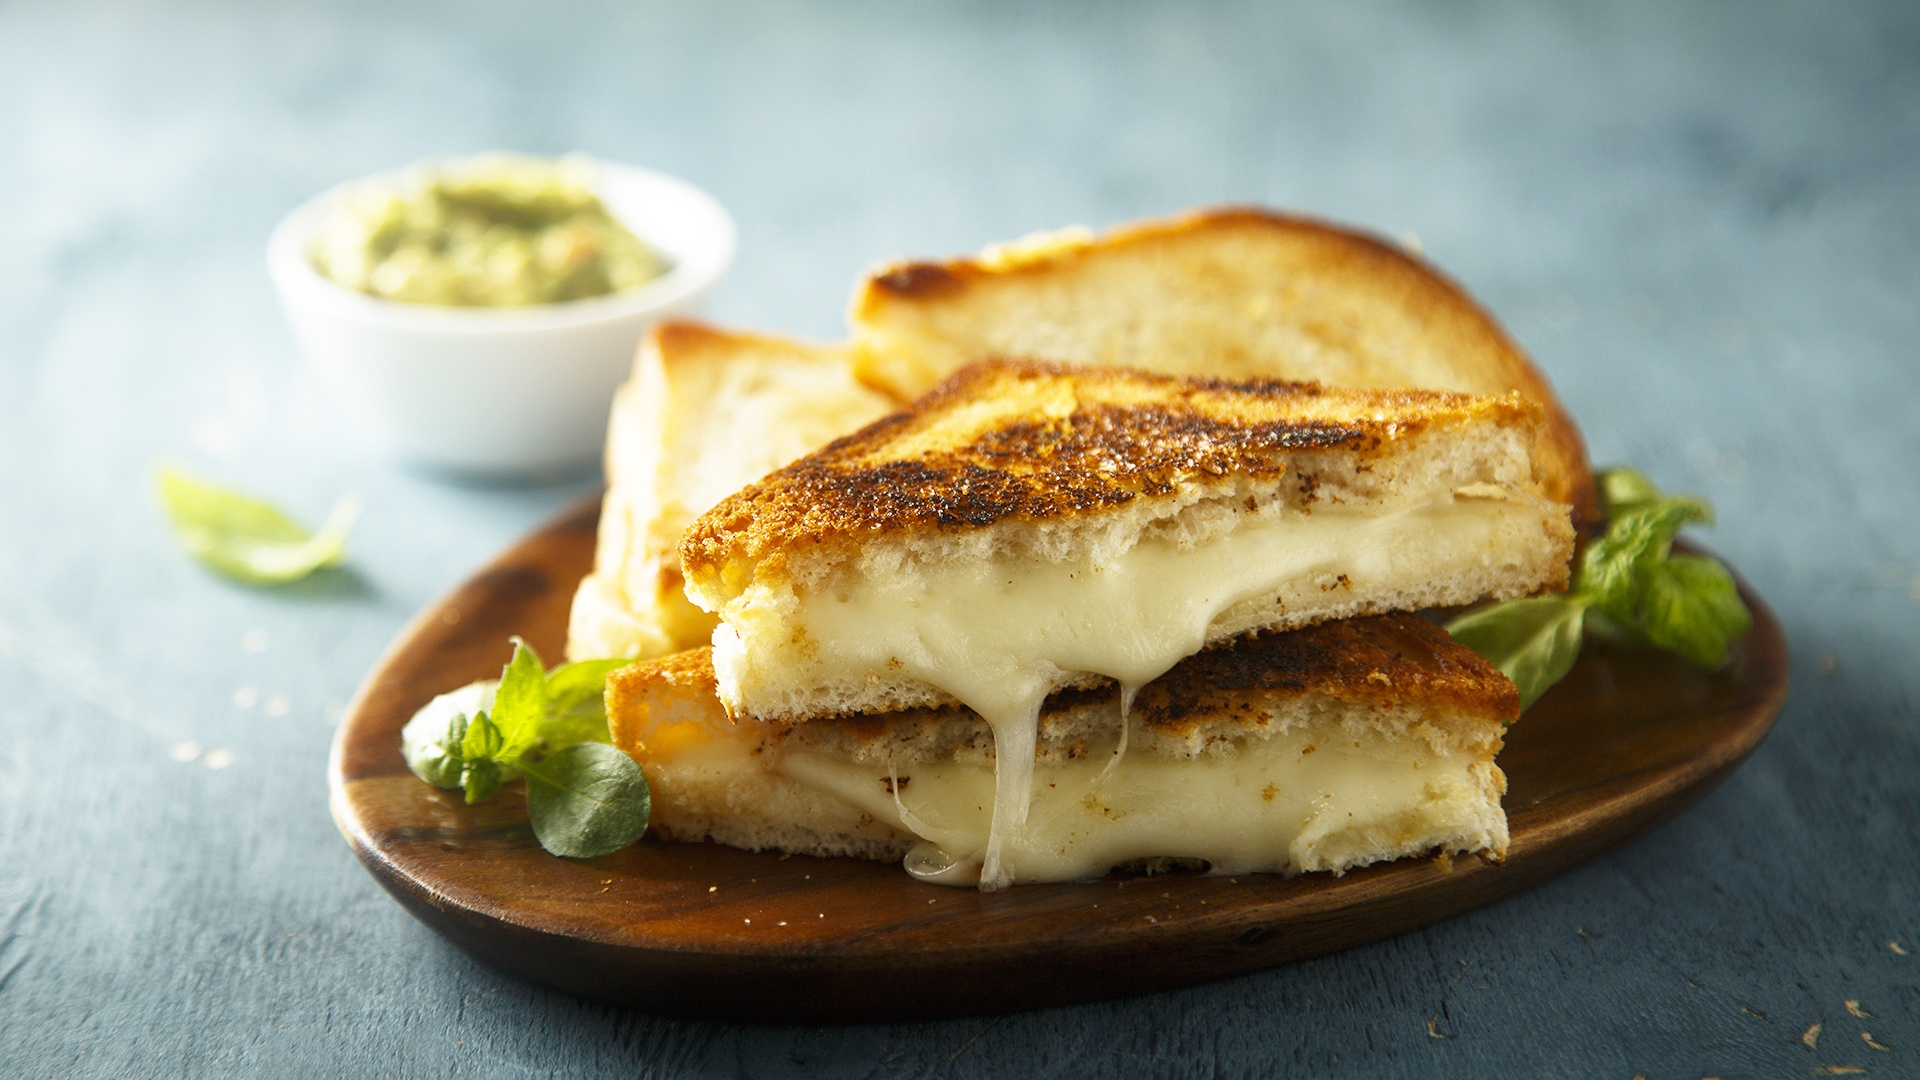 14 Grilled Cheese Sandwiches Recipes That Make Perfect Easy Dinners – SheKnows